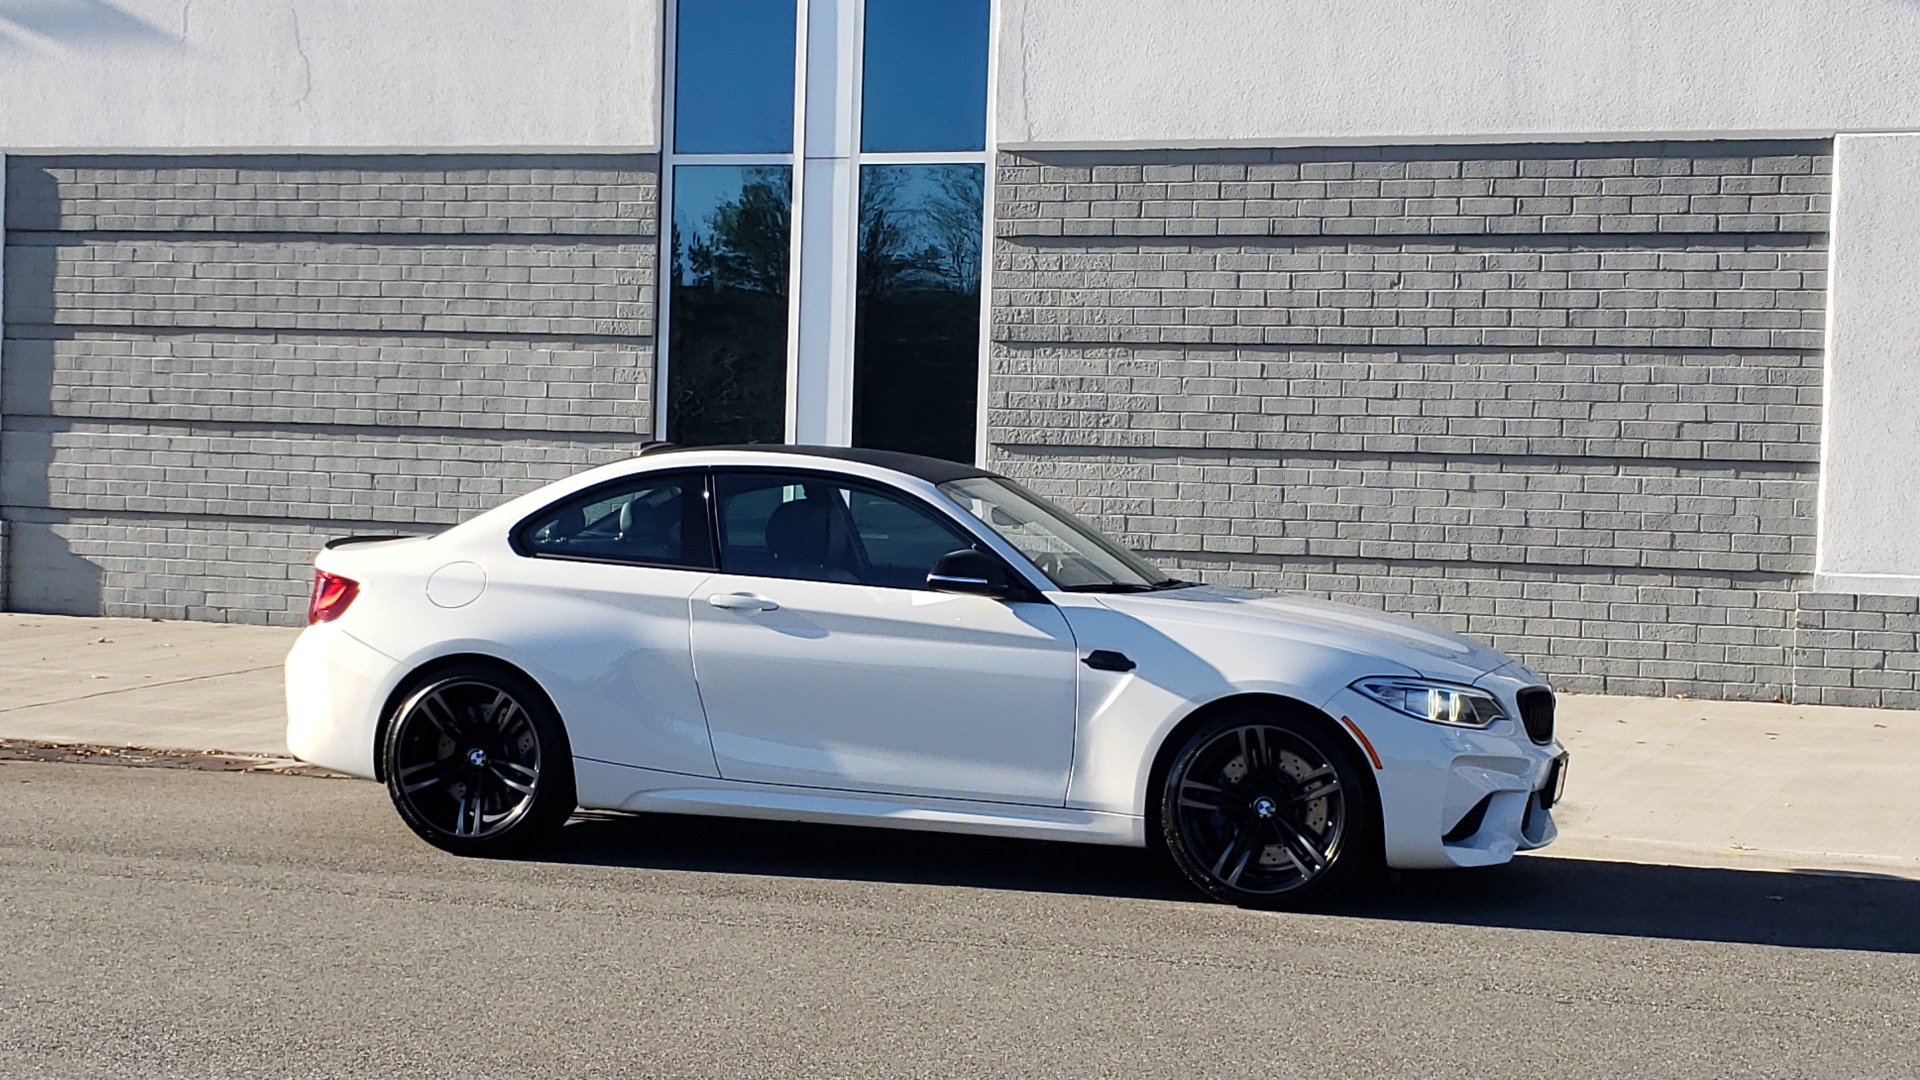 Used 2017 BMW M2 COUPE / MANUAL / EXEC PKG / NAV / WIFI / PDC / REARVIEW for sale Sold at Formula Imports in Charlotte NC 28227 8